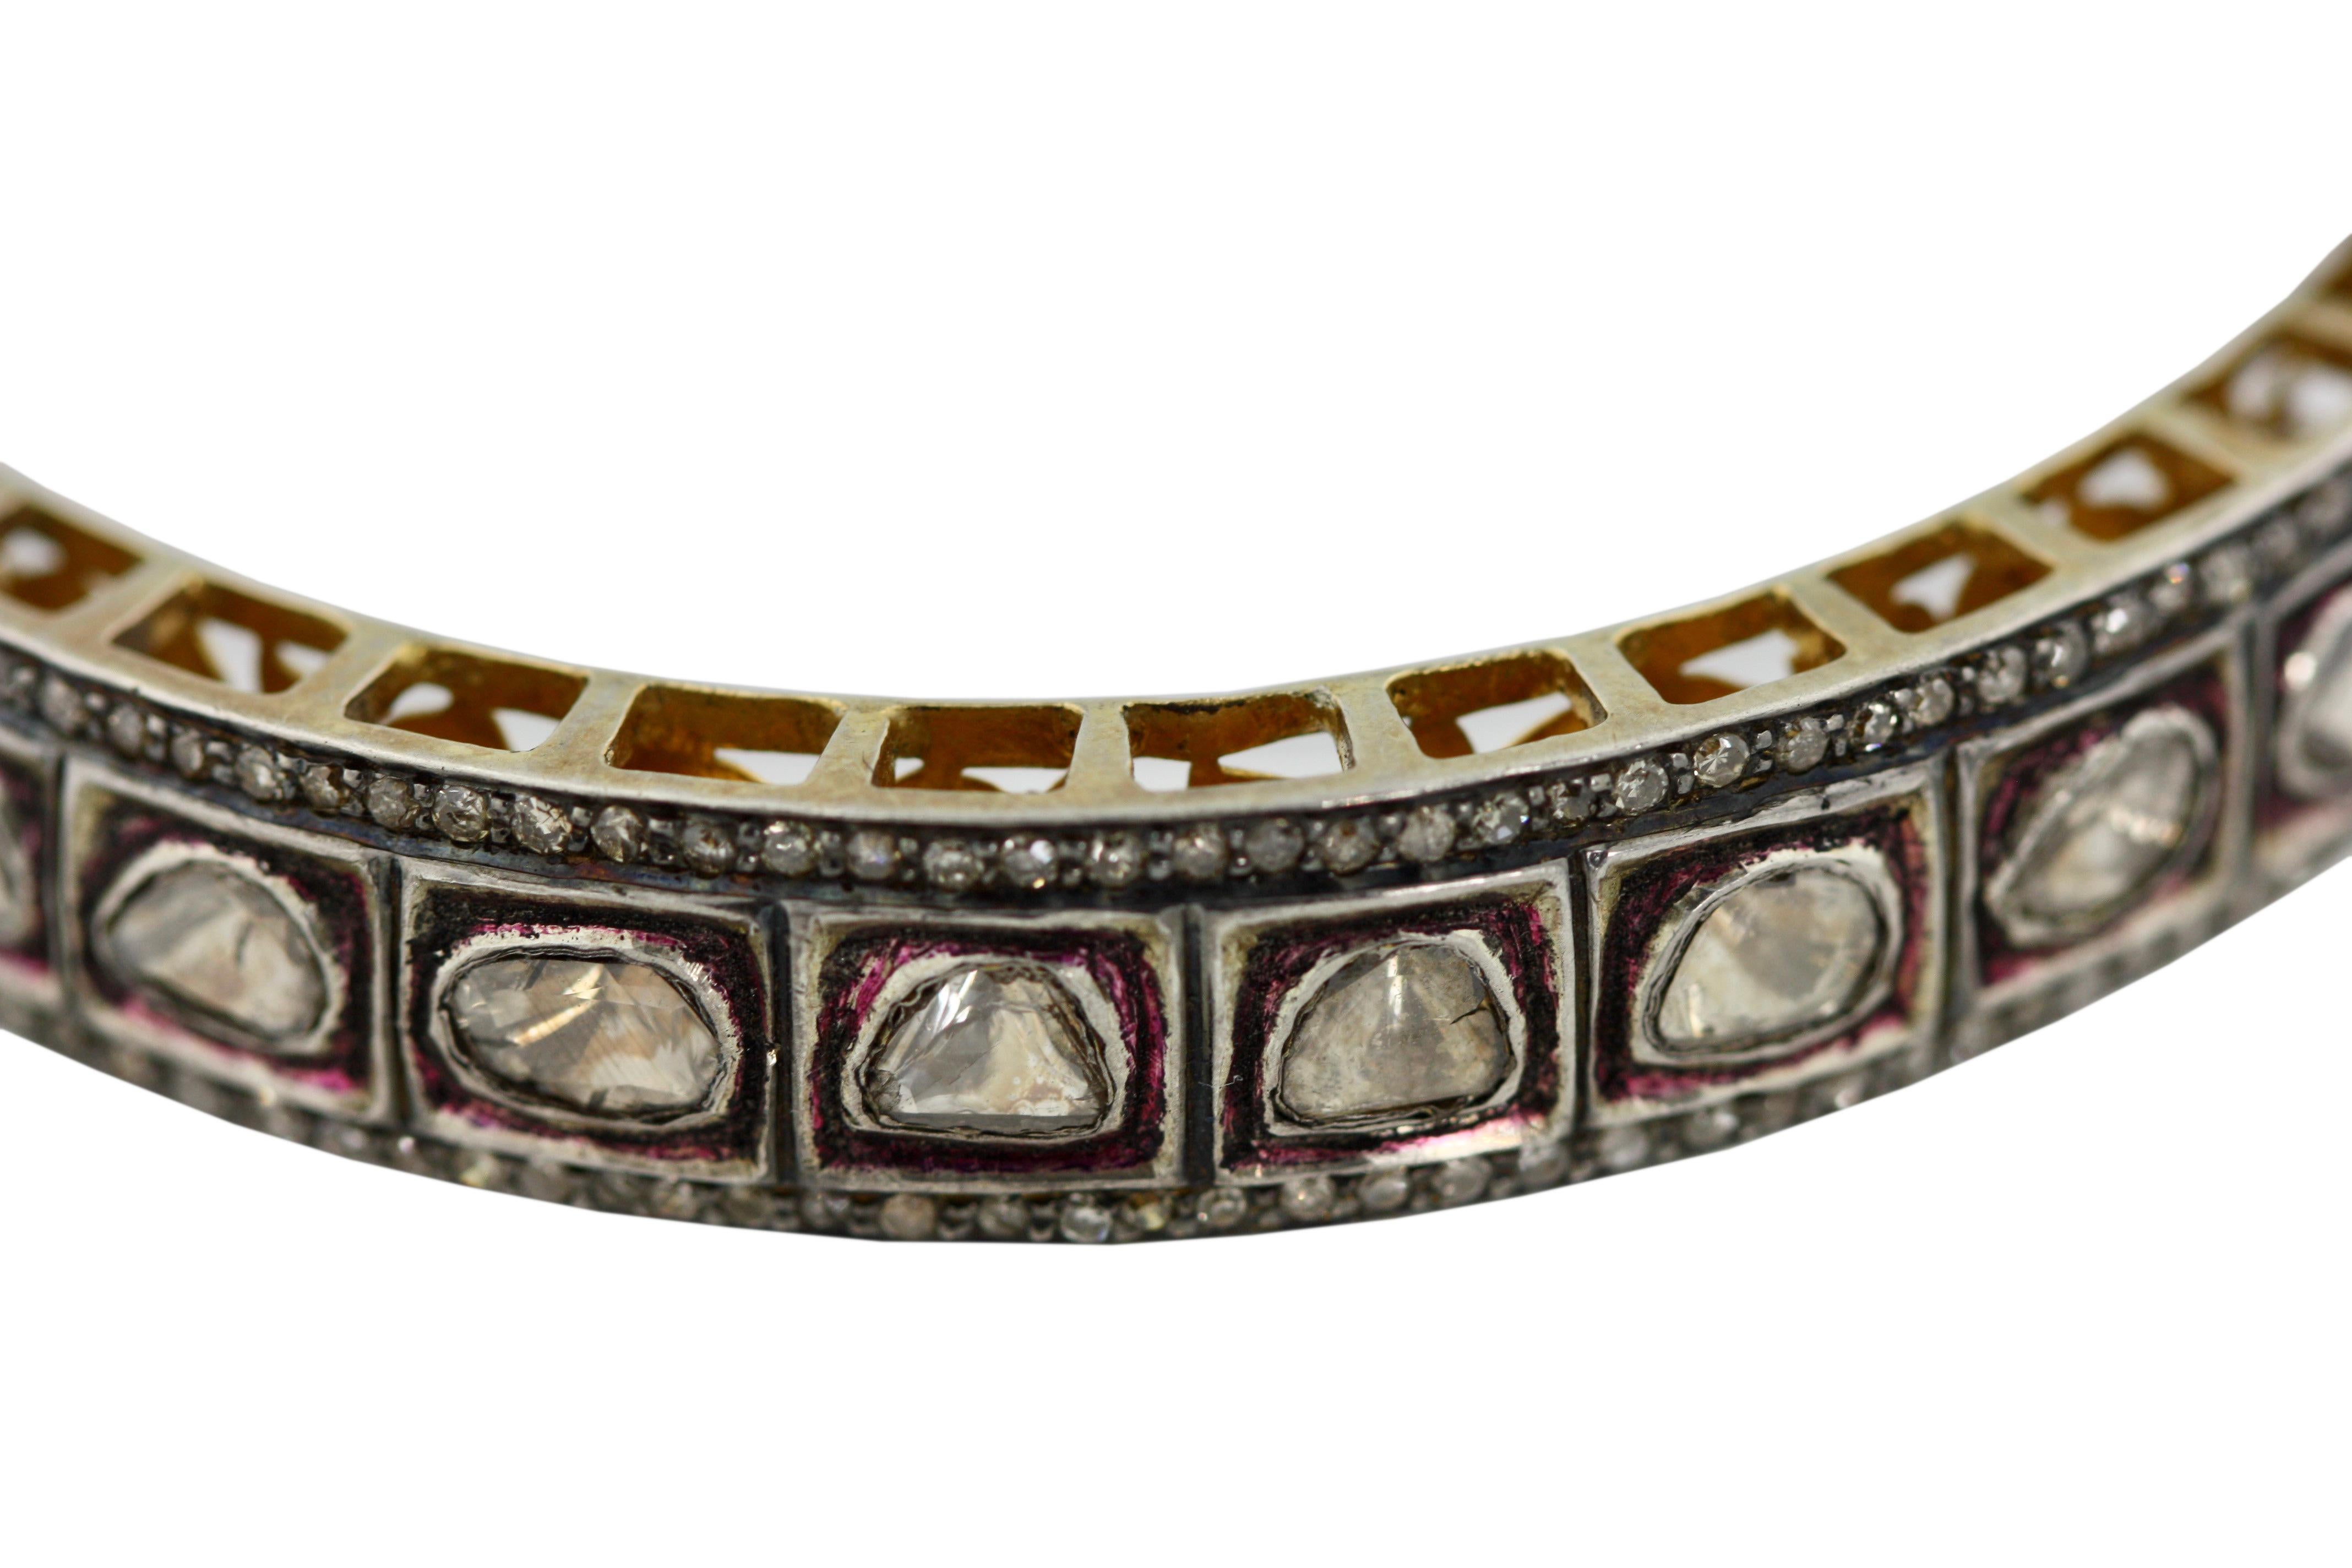 TWO-COLOR GOLD AND DIAMOND BANGLE-BRACELET
Of hinged design, the openwork floral lattice set with rose cut diamonds, bordered by round cut diamonds, gross weight approximately 43 grams, internal circumference 4.5 inches (11.43 cm.)